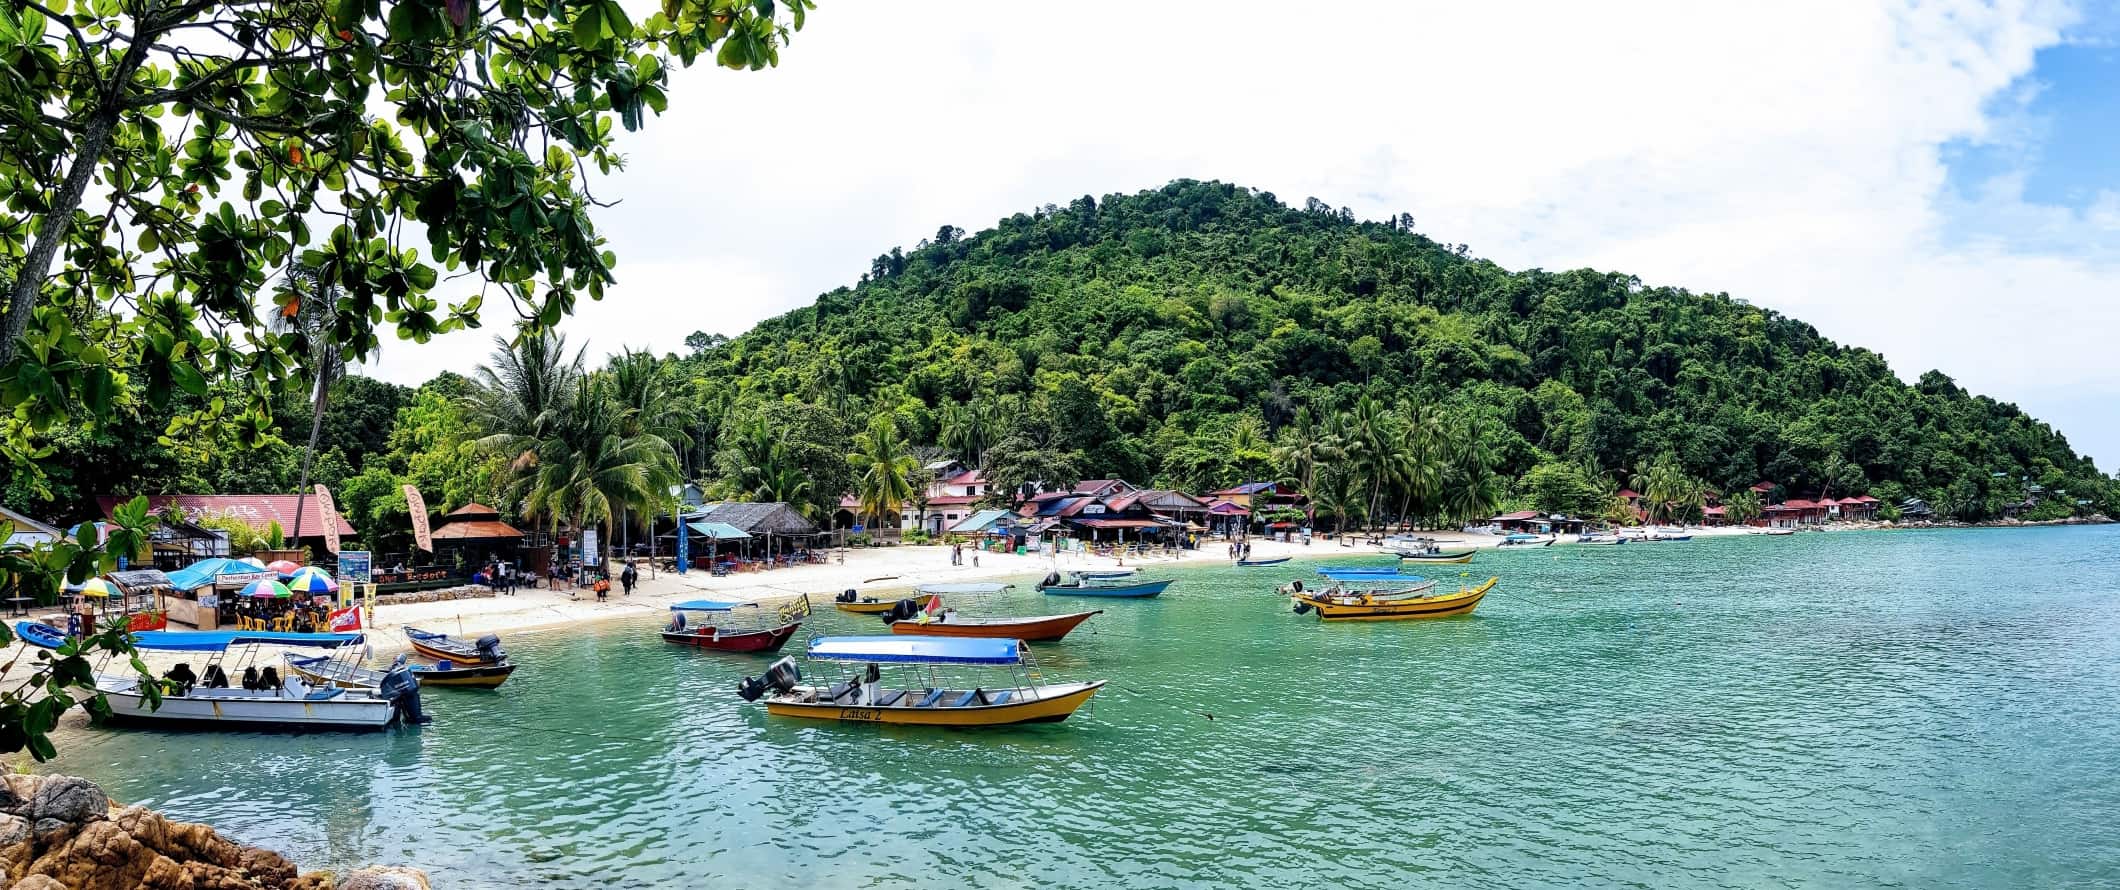 Boats anchored in the water off a beach in the Perhentian Islands, Malaysia